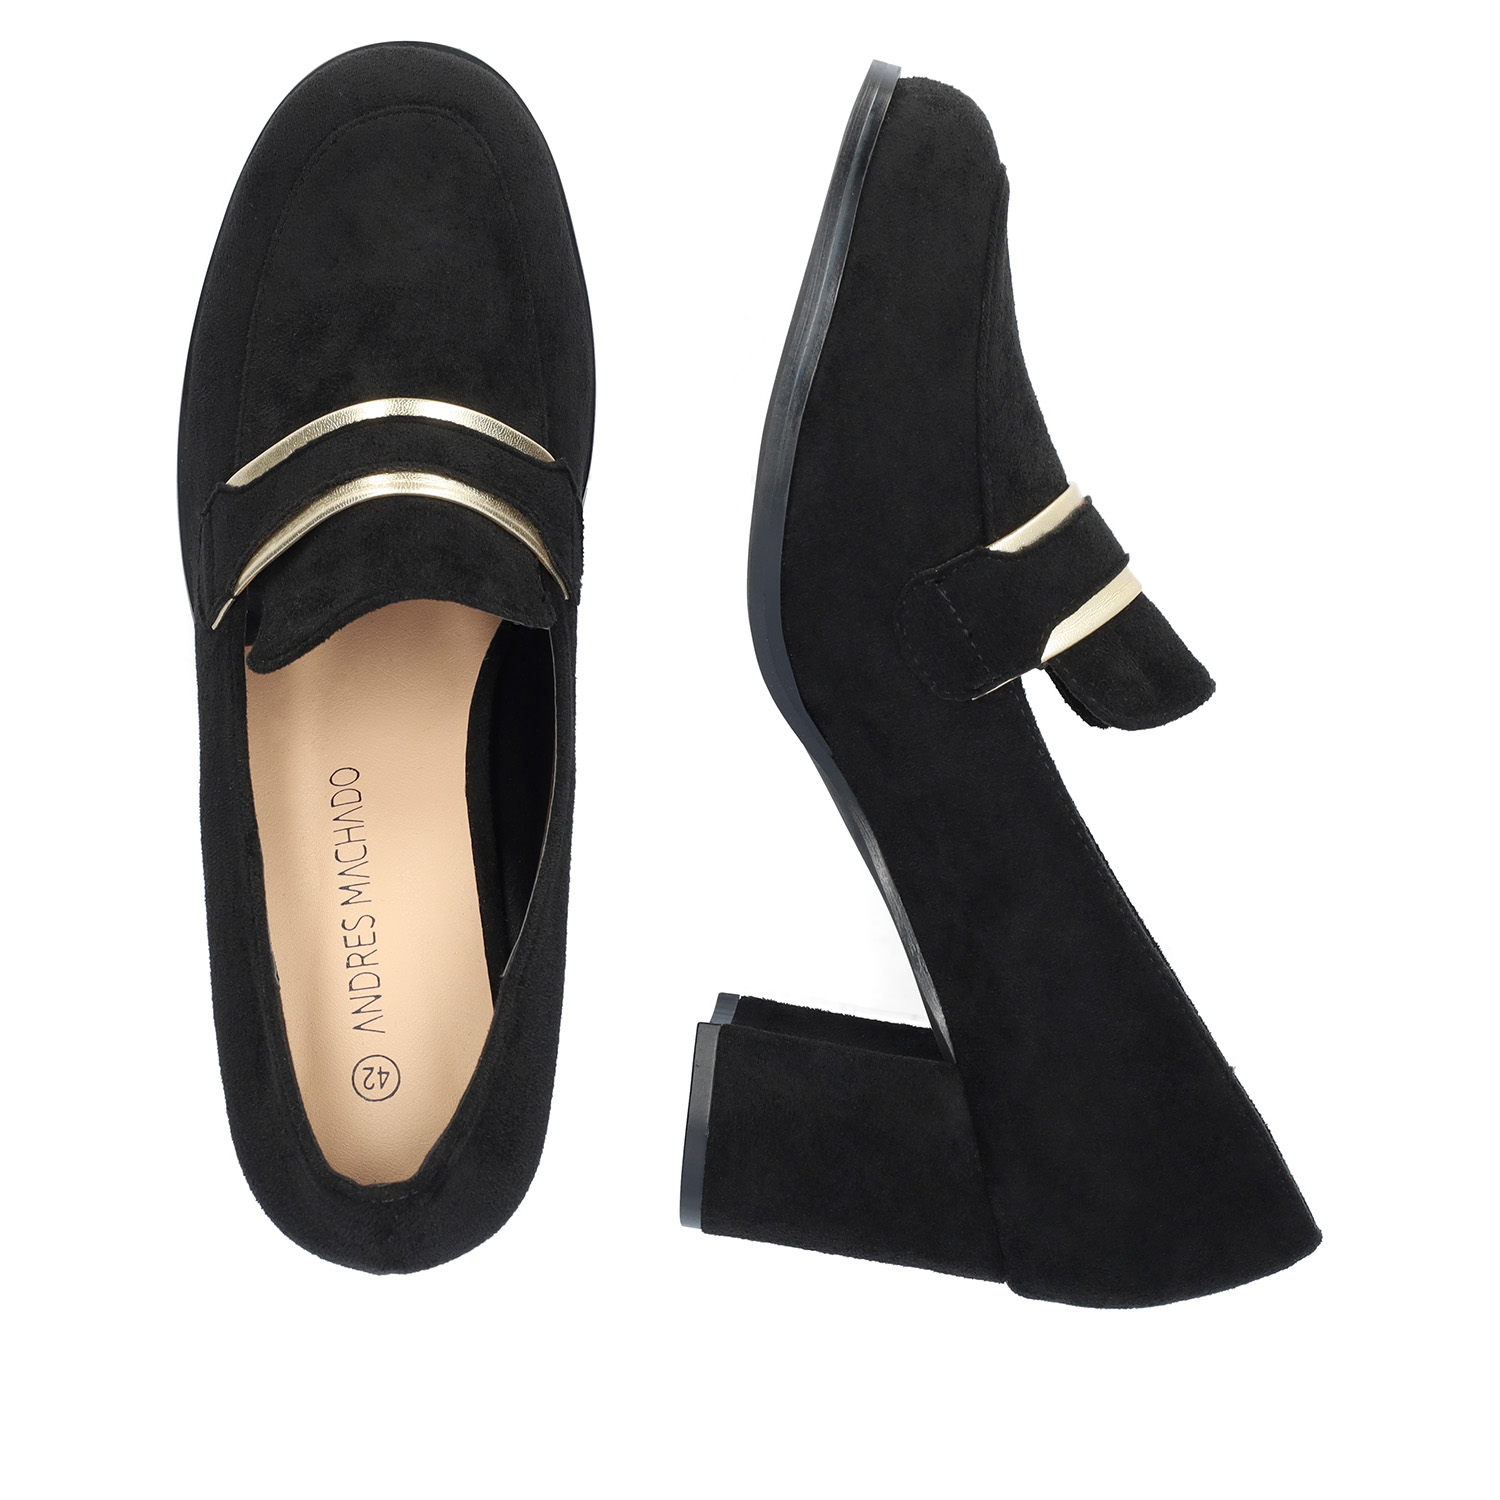 Heeled moccasins in black-colored faux suede 